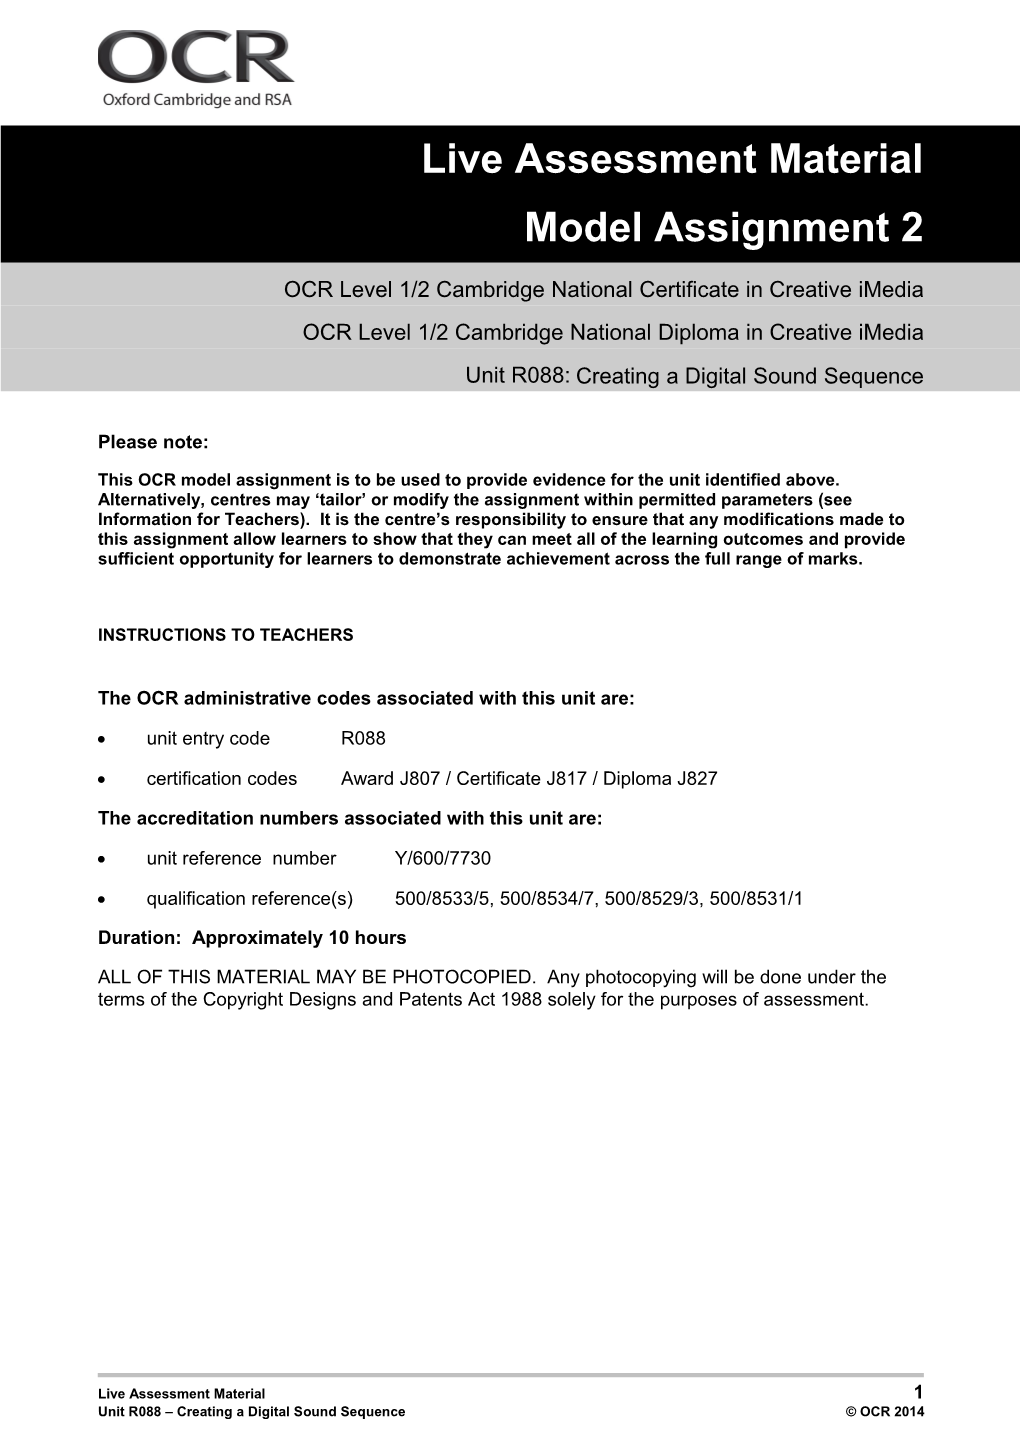 Unit R088 - Creating a Digital Sound Sequence - Model Assignment 2